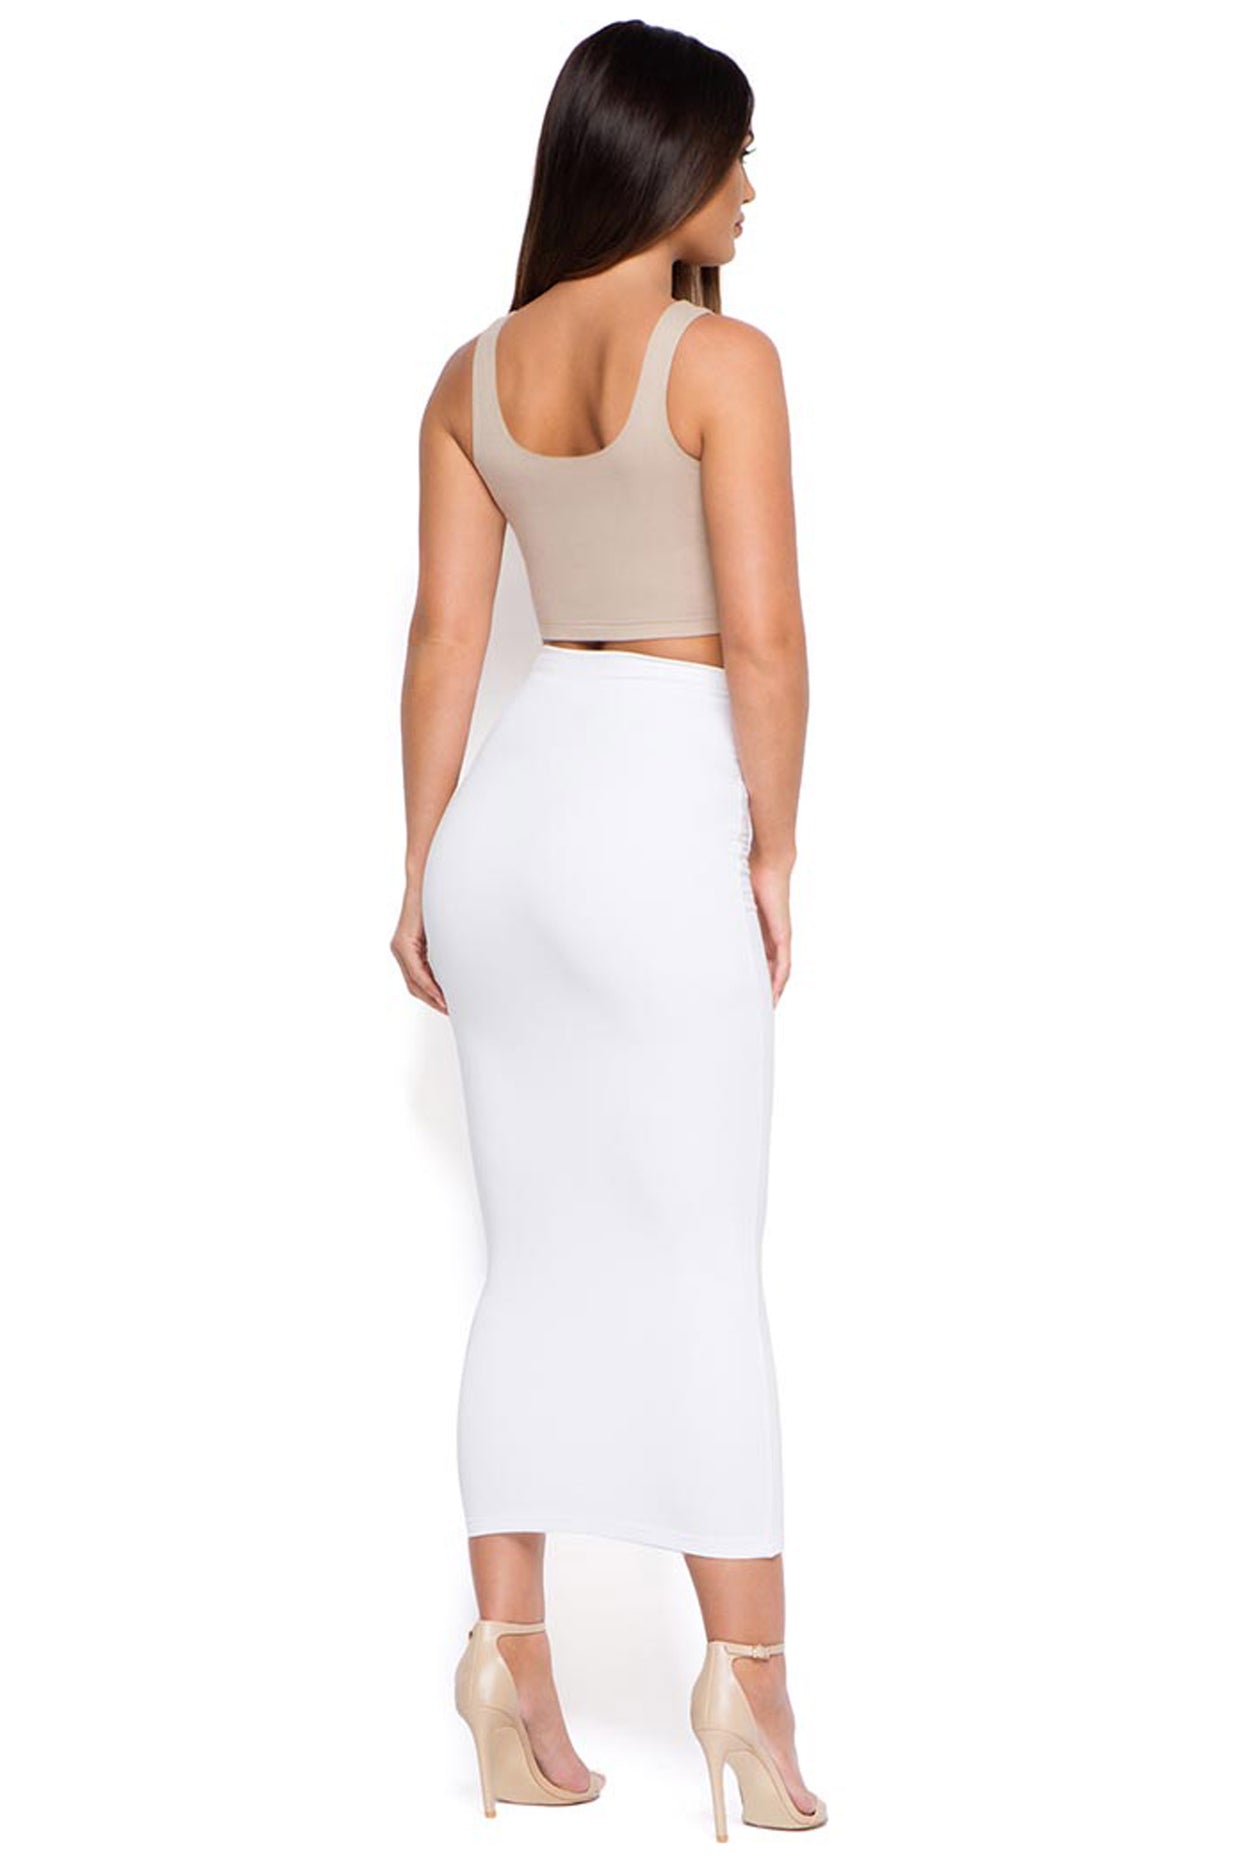 Behind The Curve High Waisted Midi Skirt in White